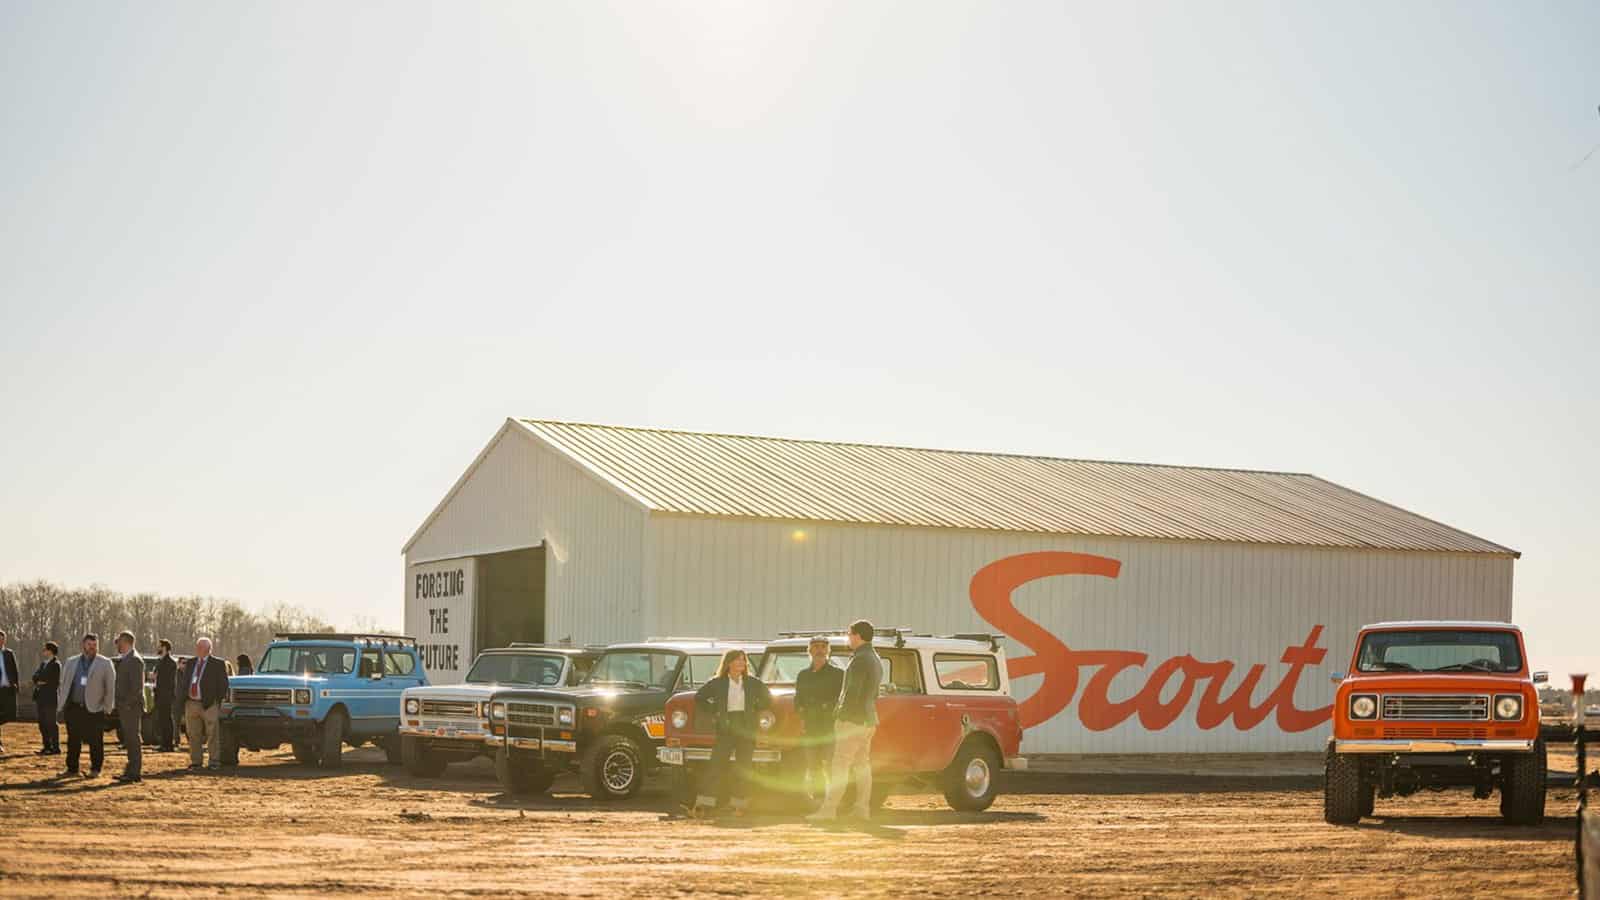 Scout Motors manufacturing plant groundbreaking ceremony with large shed with "Scout" written on the side and vintage vehicles parked around it.